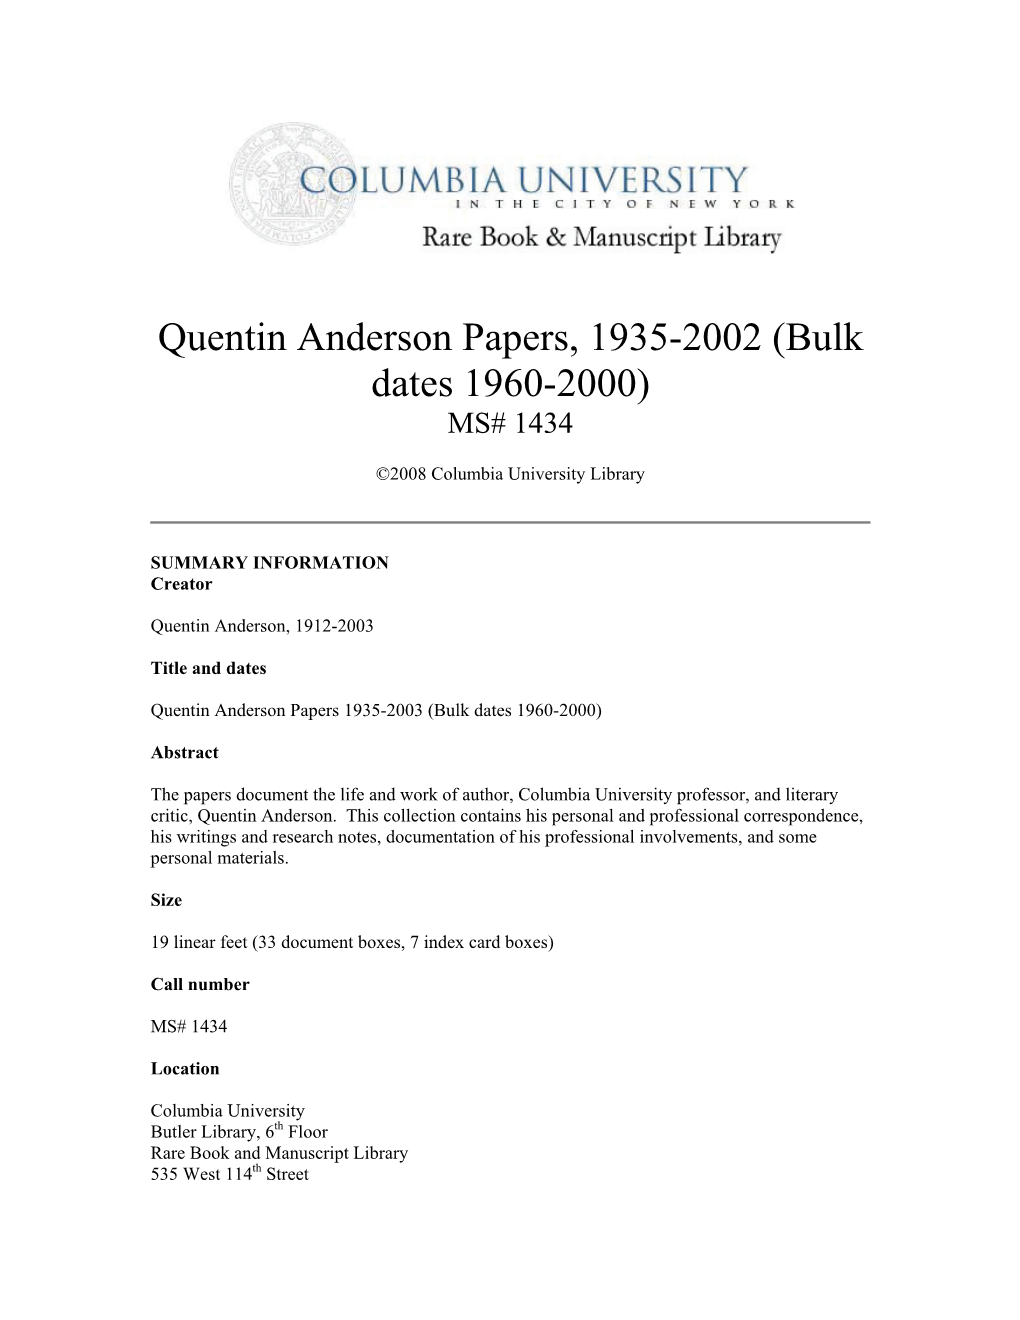 Quentin Anderson Papers, 1935-2002 (Bulk Dates 1960-2000) MS# 1434